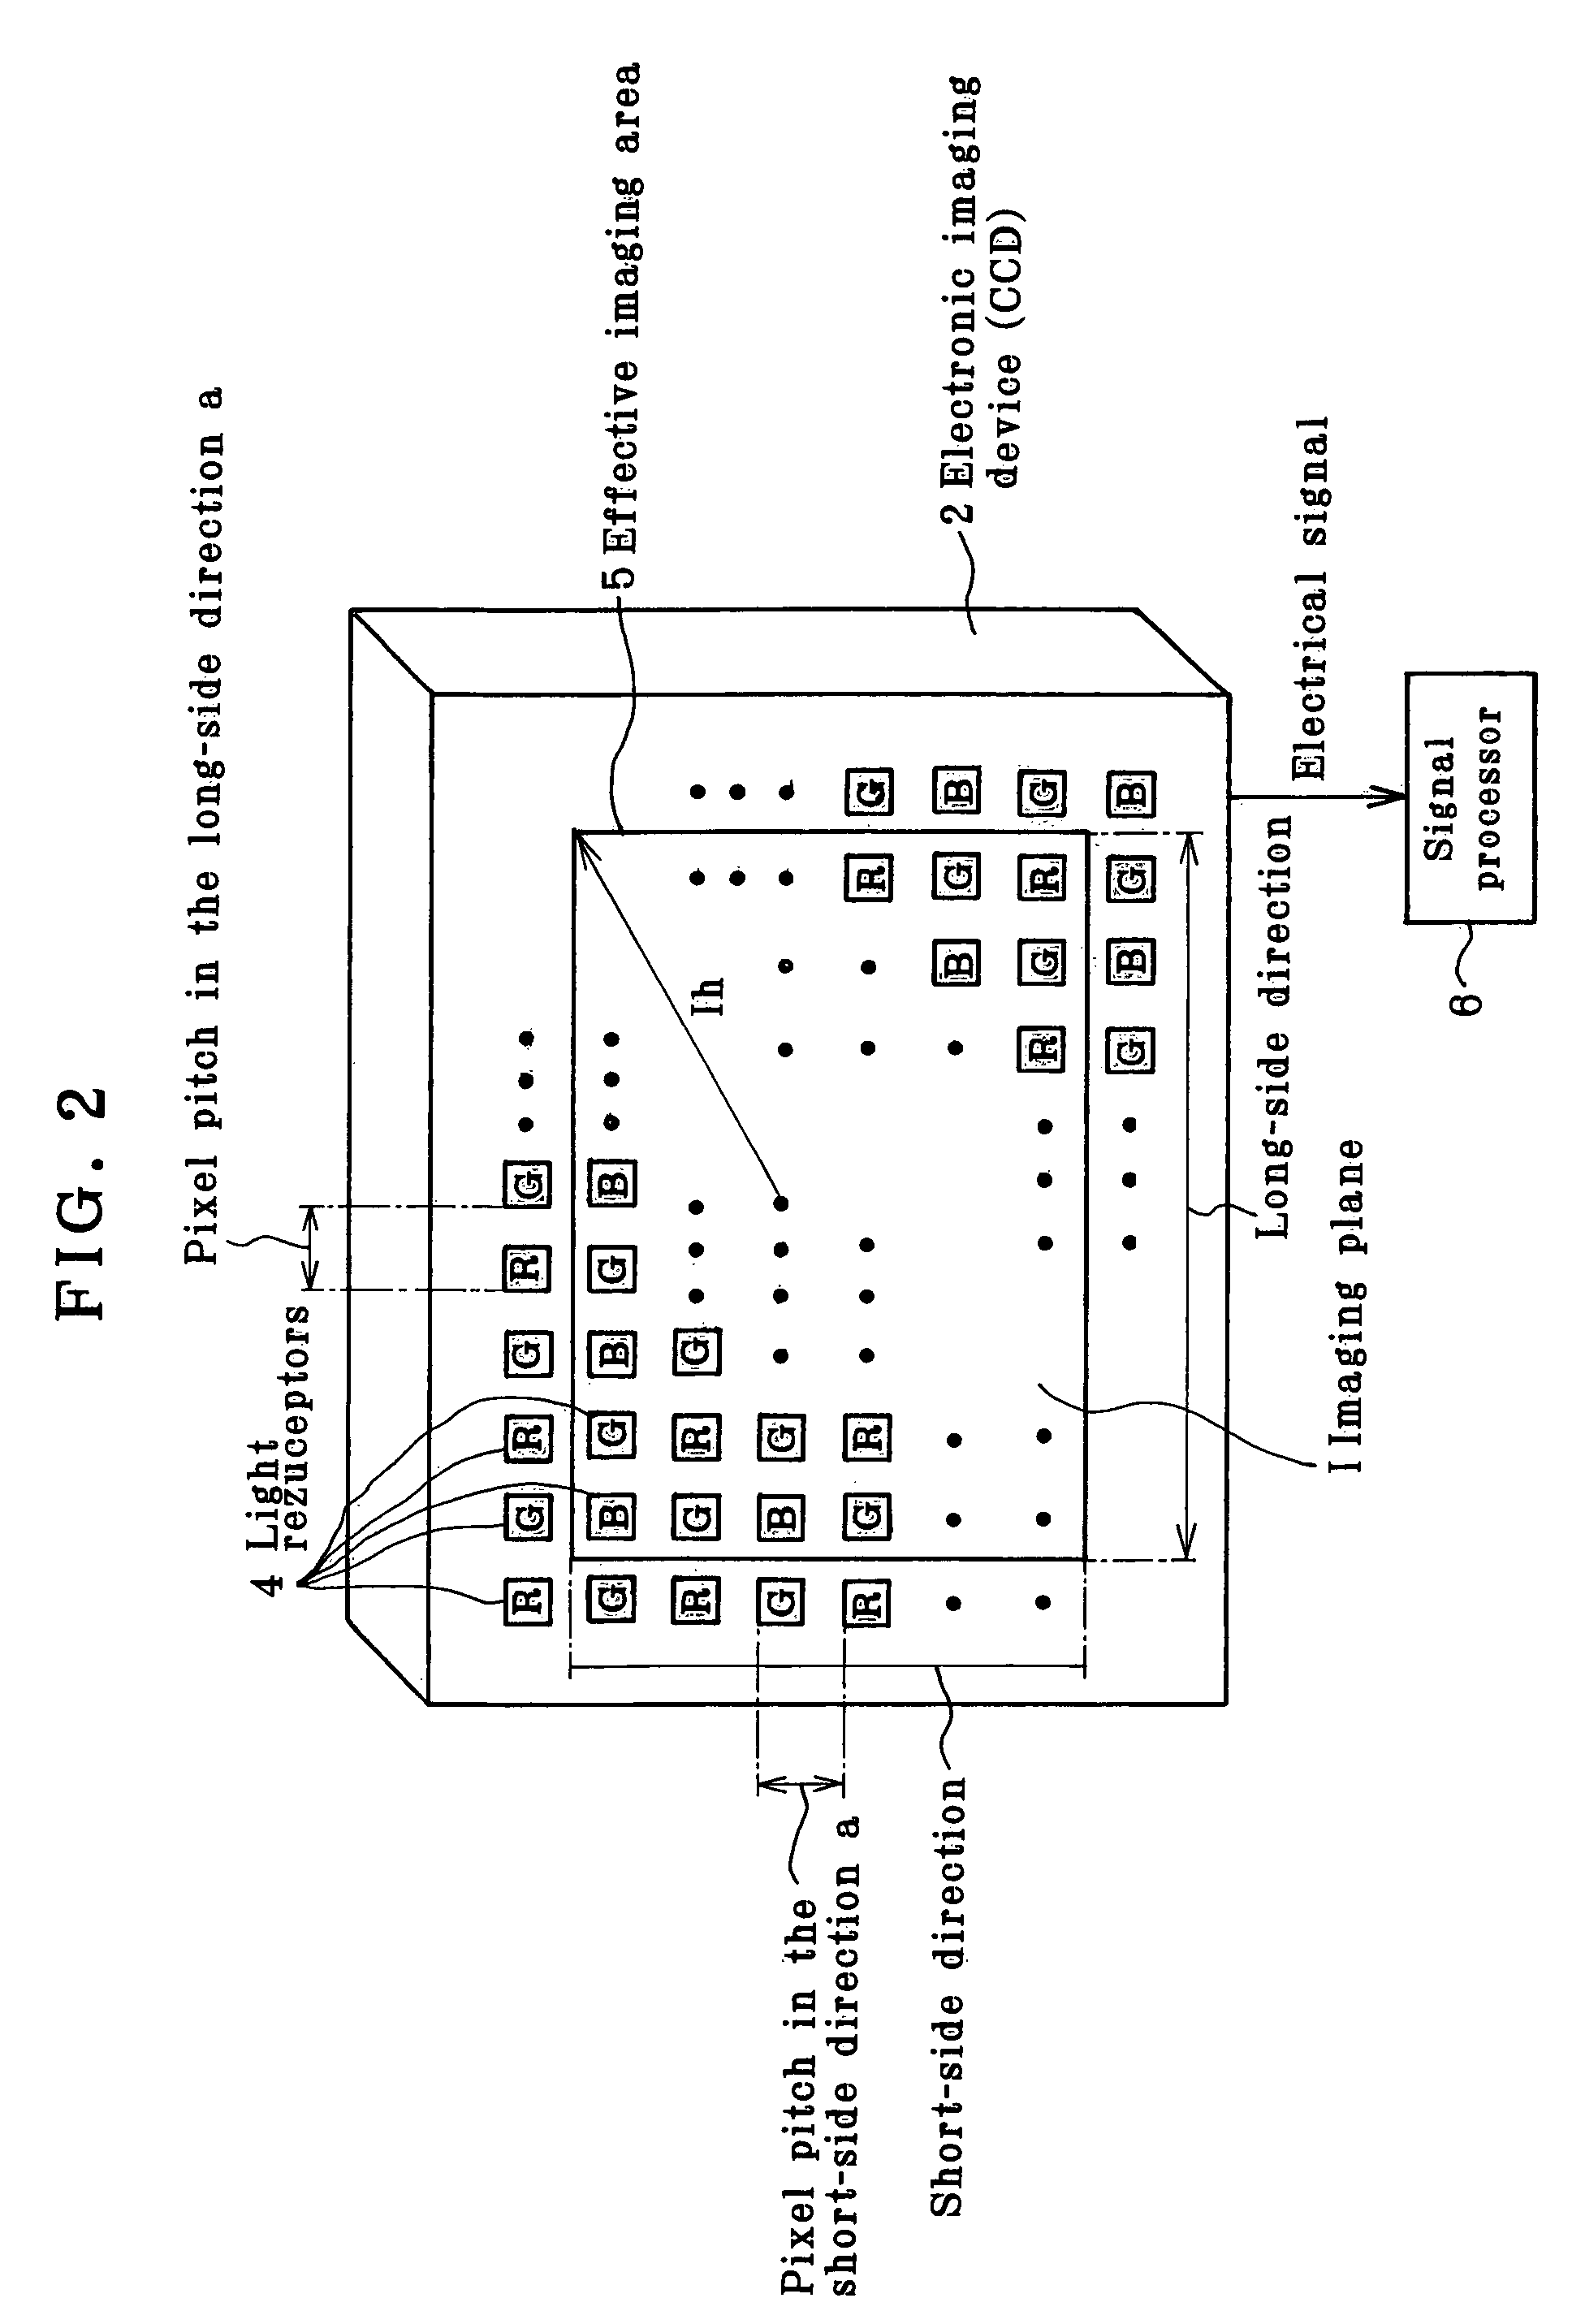 Imaging apparatus adapted to implement electrical image restoration processing